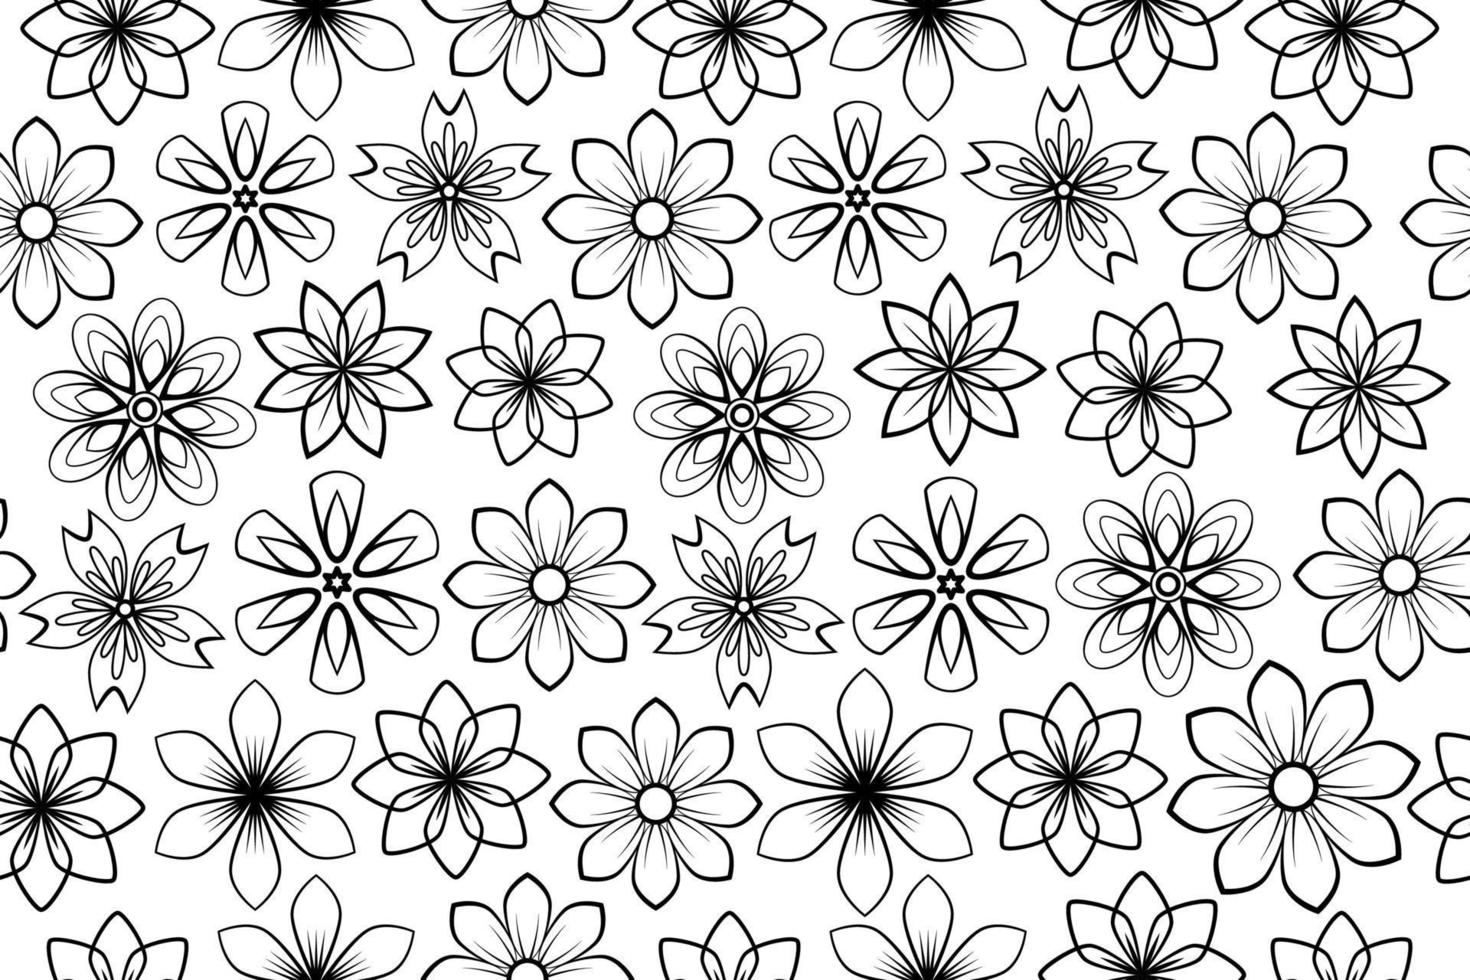 Floral seamless black and white. Flowers and leaves. Repeating monochrome background. Summer and spring print. Blooming line art flowers and flowering herbs with black lines on white background. vector